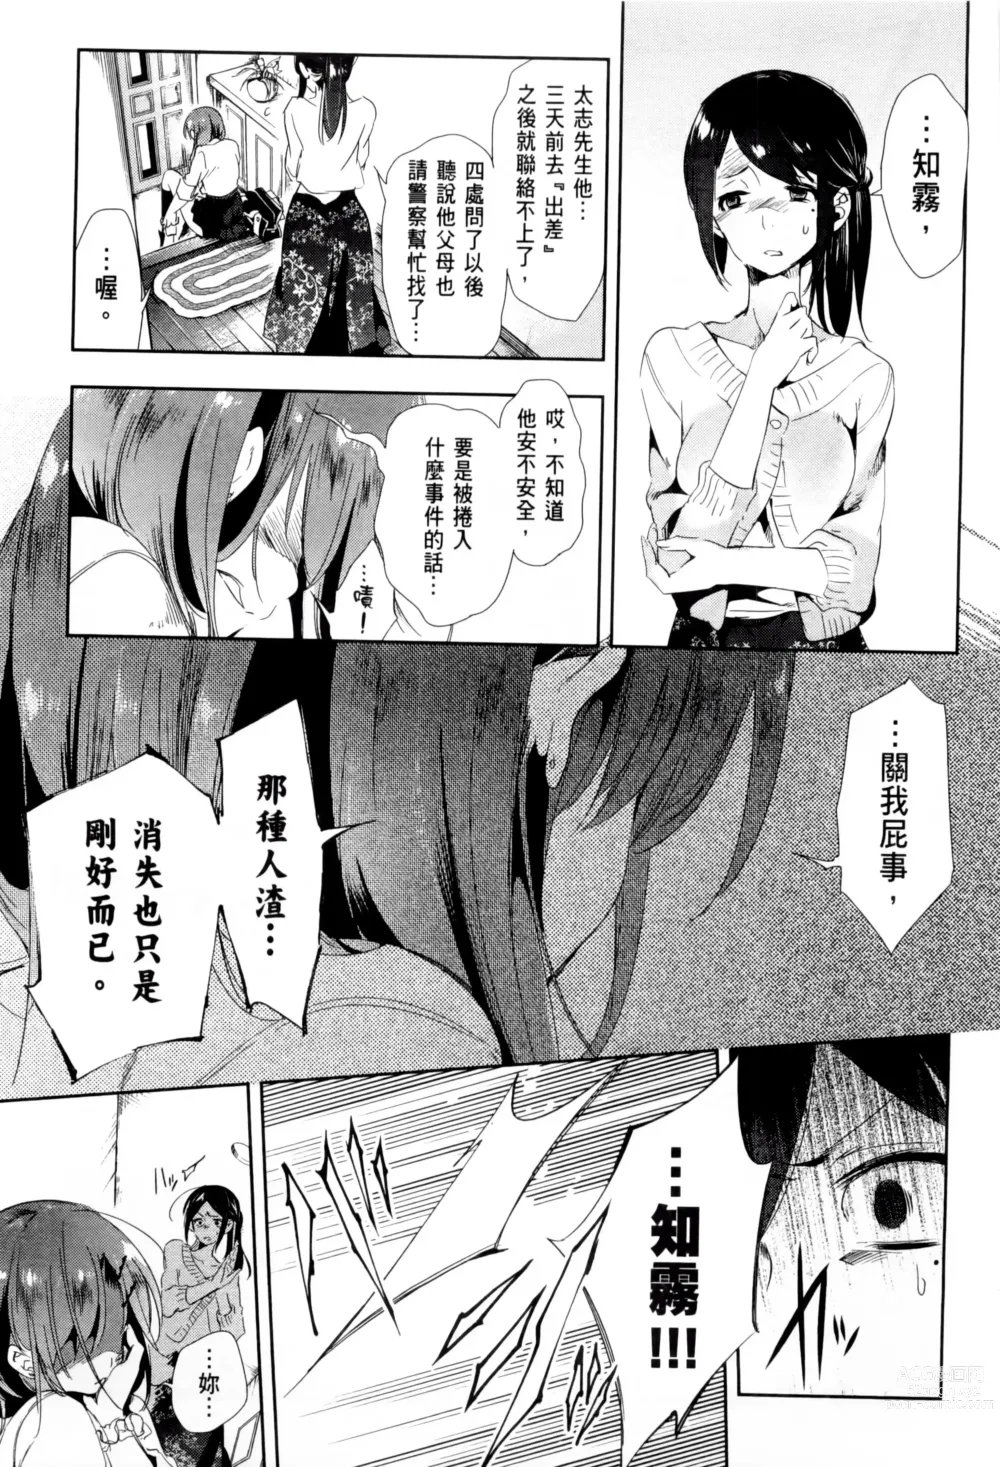 Page 171 of manga 神さまの怨結び 第2巻